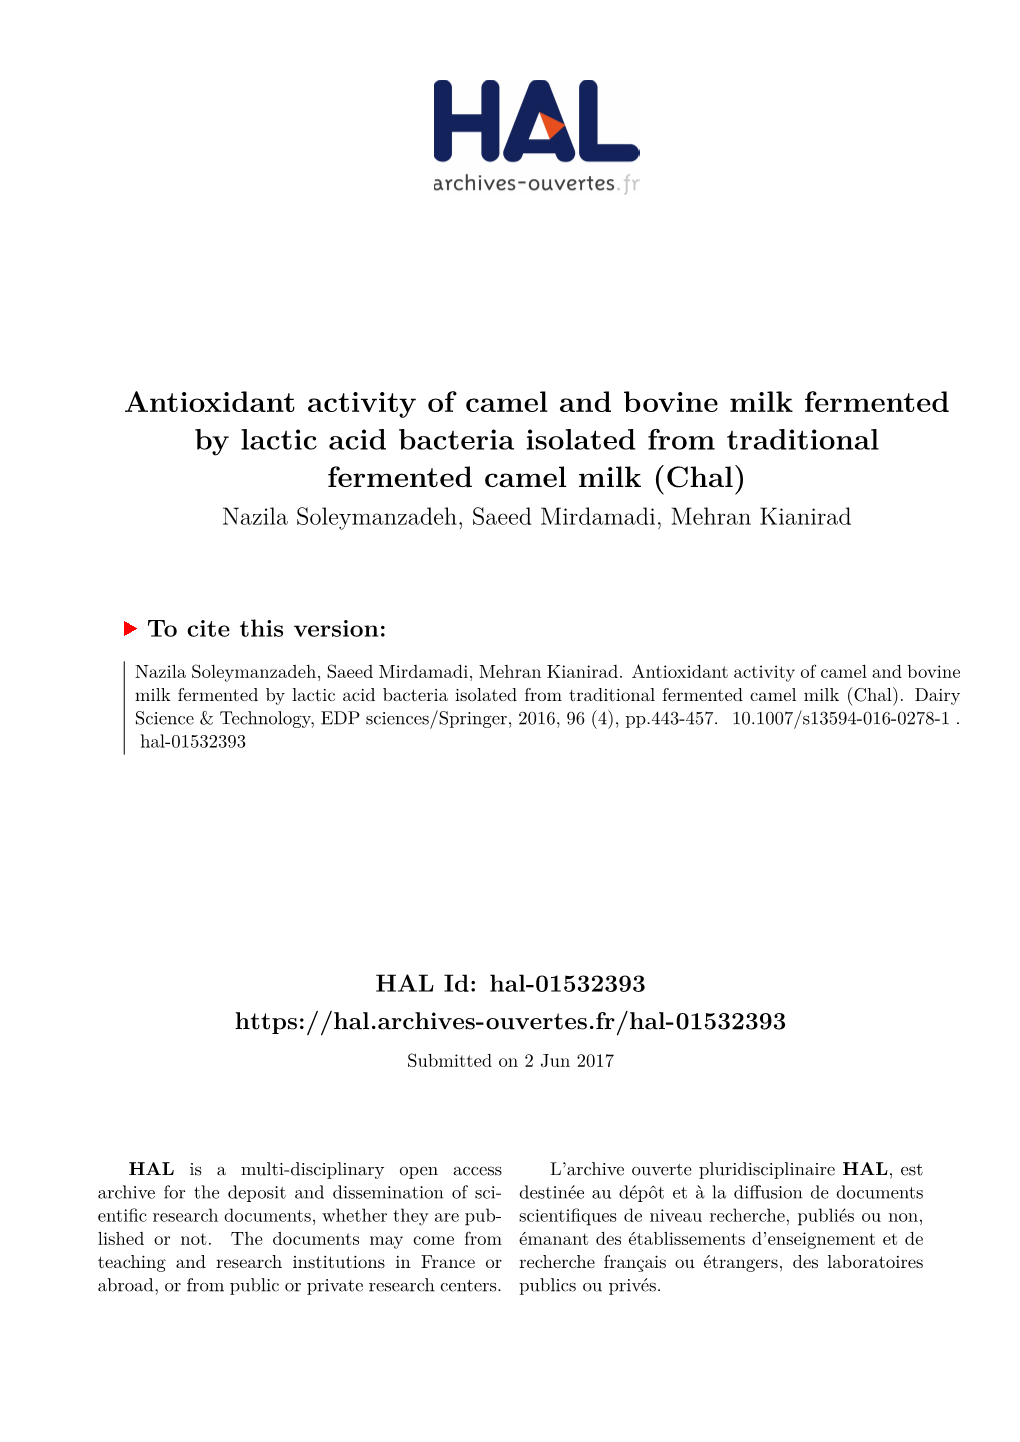 Antioxidant Activity of Camel and Bovine Milk Fermented by Lactic Acid